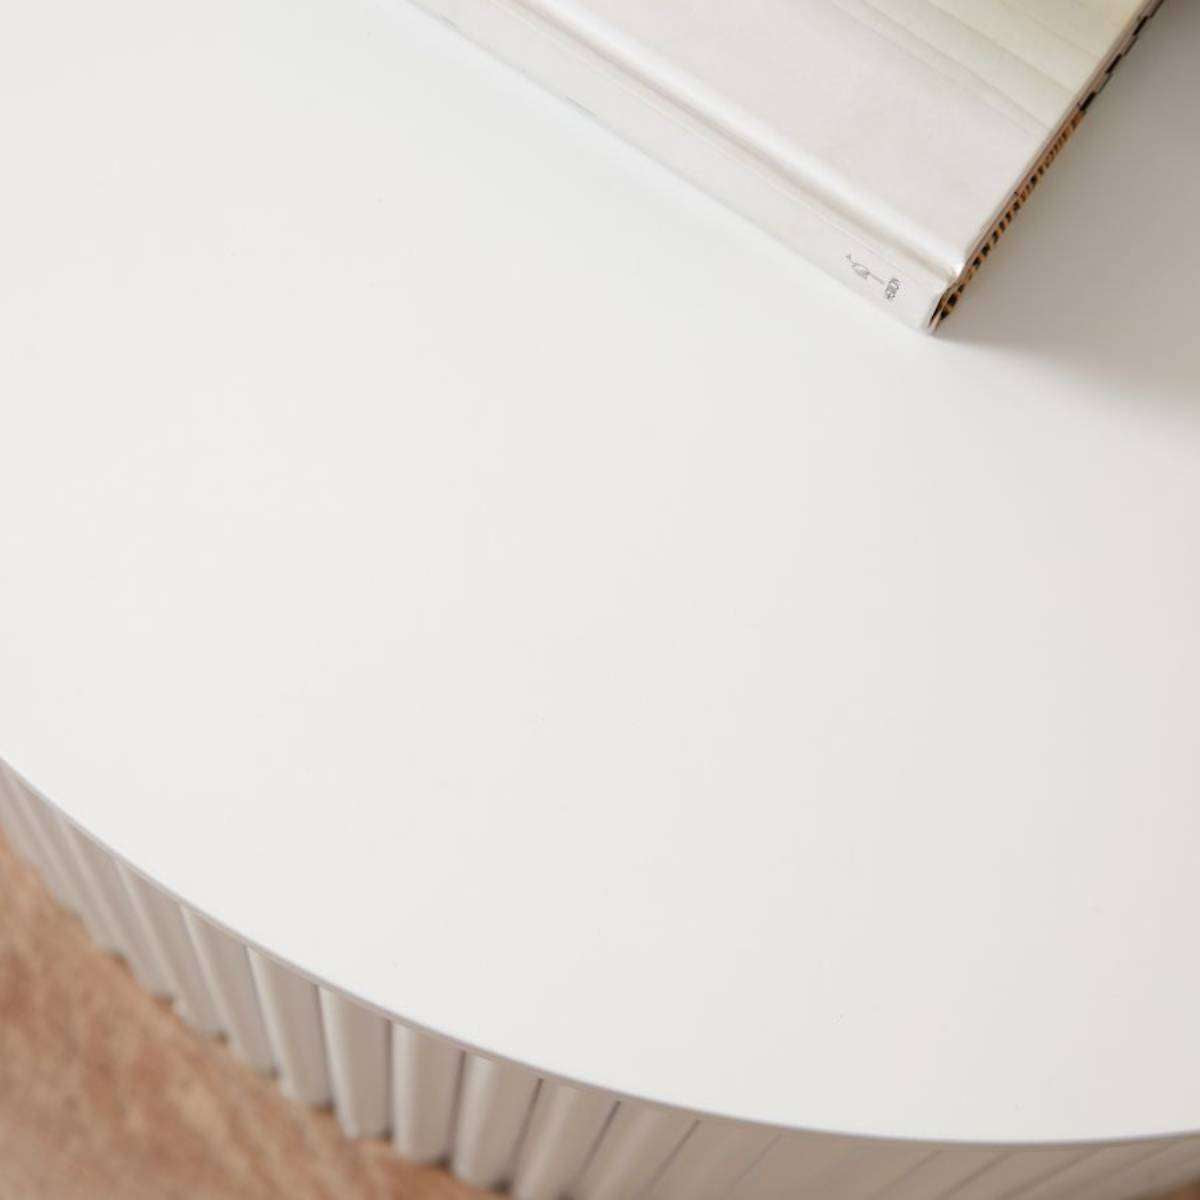 Eve Drum Coffee Table - White